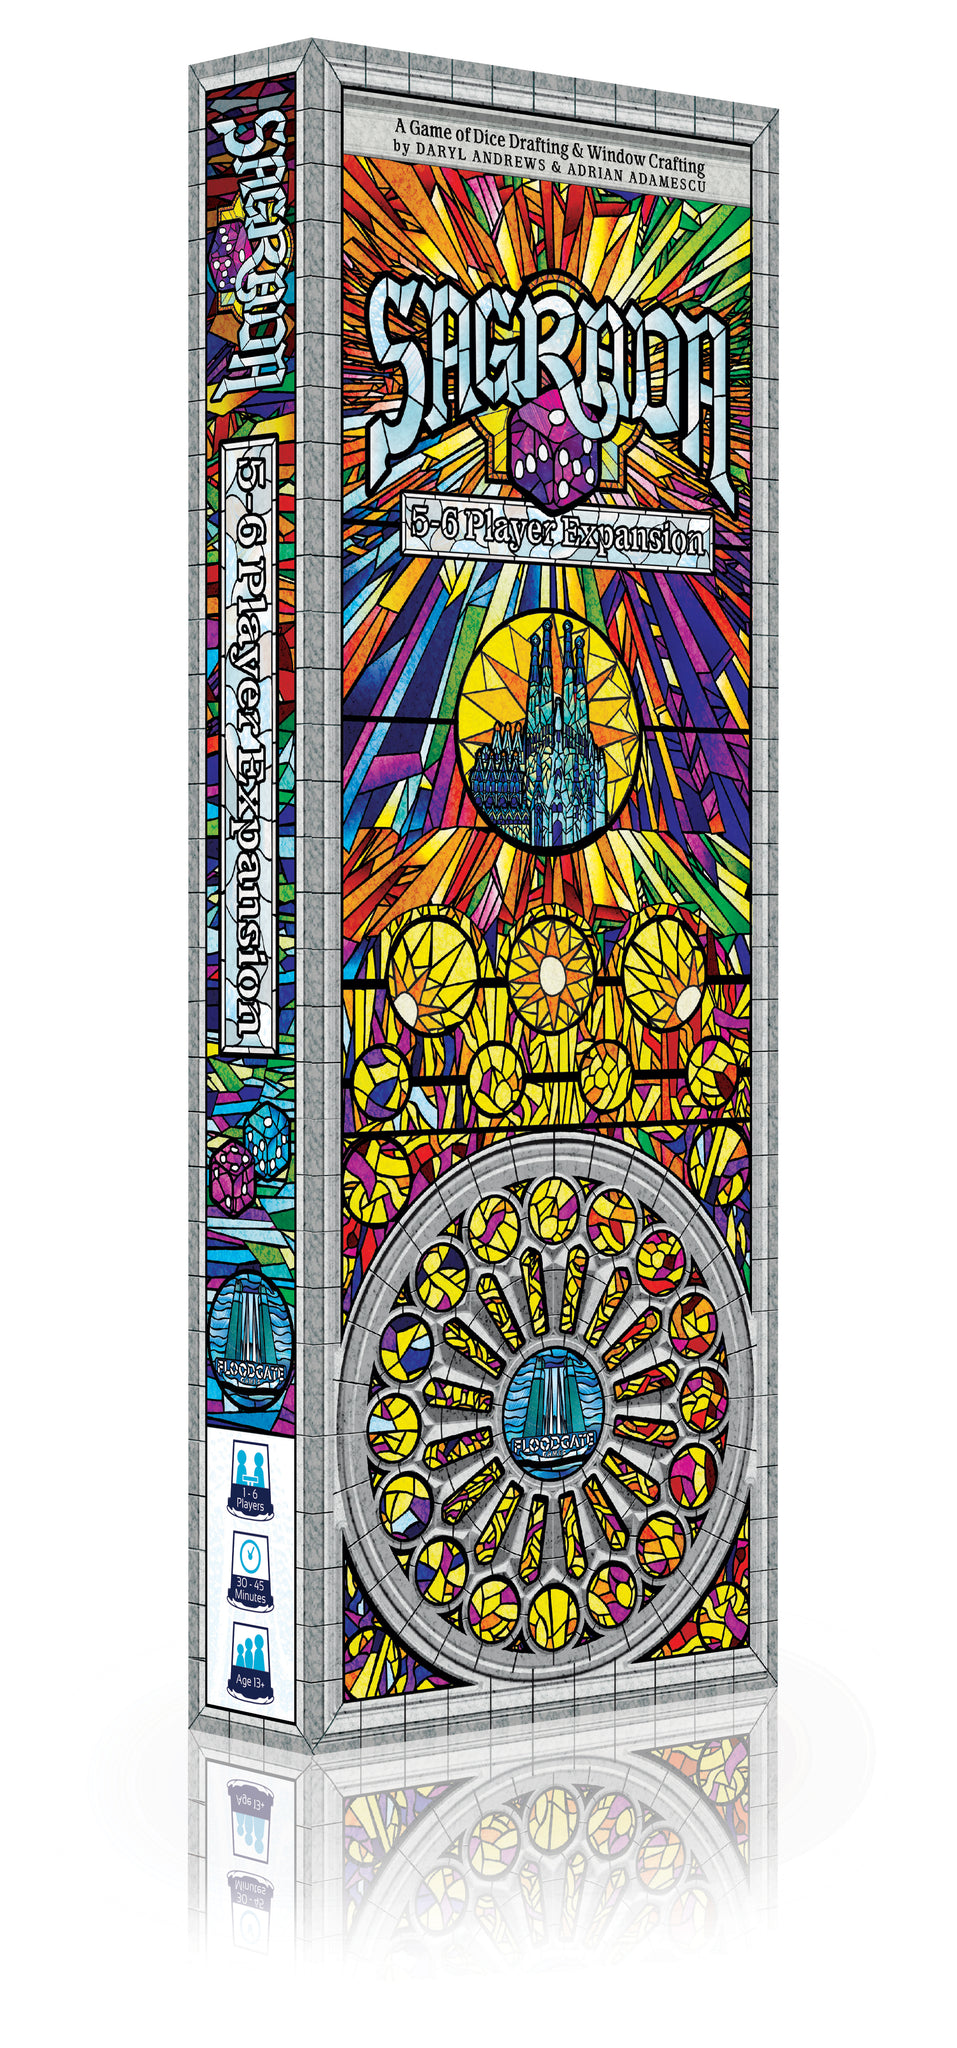 Sagrada 5 to 6 Player Expansion (T.O.S.) -  Floodgate Games